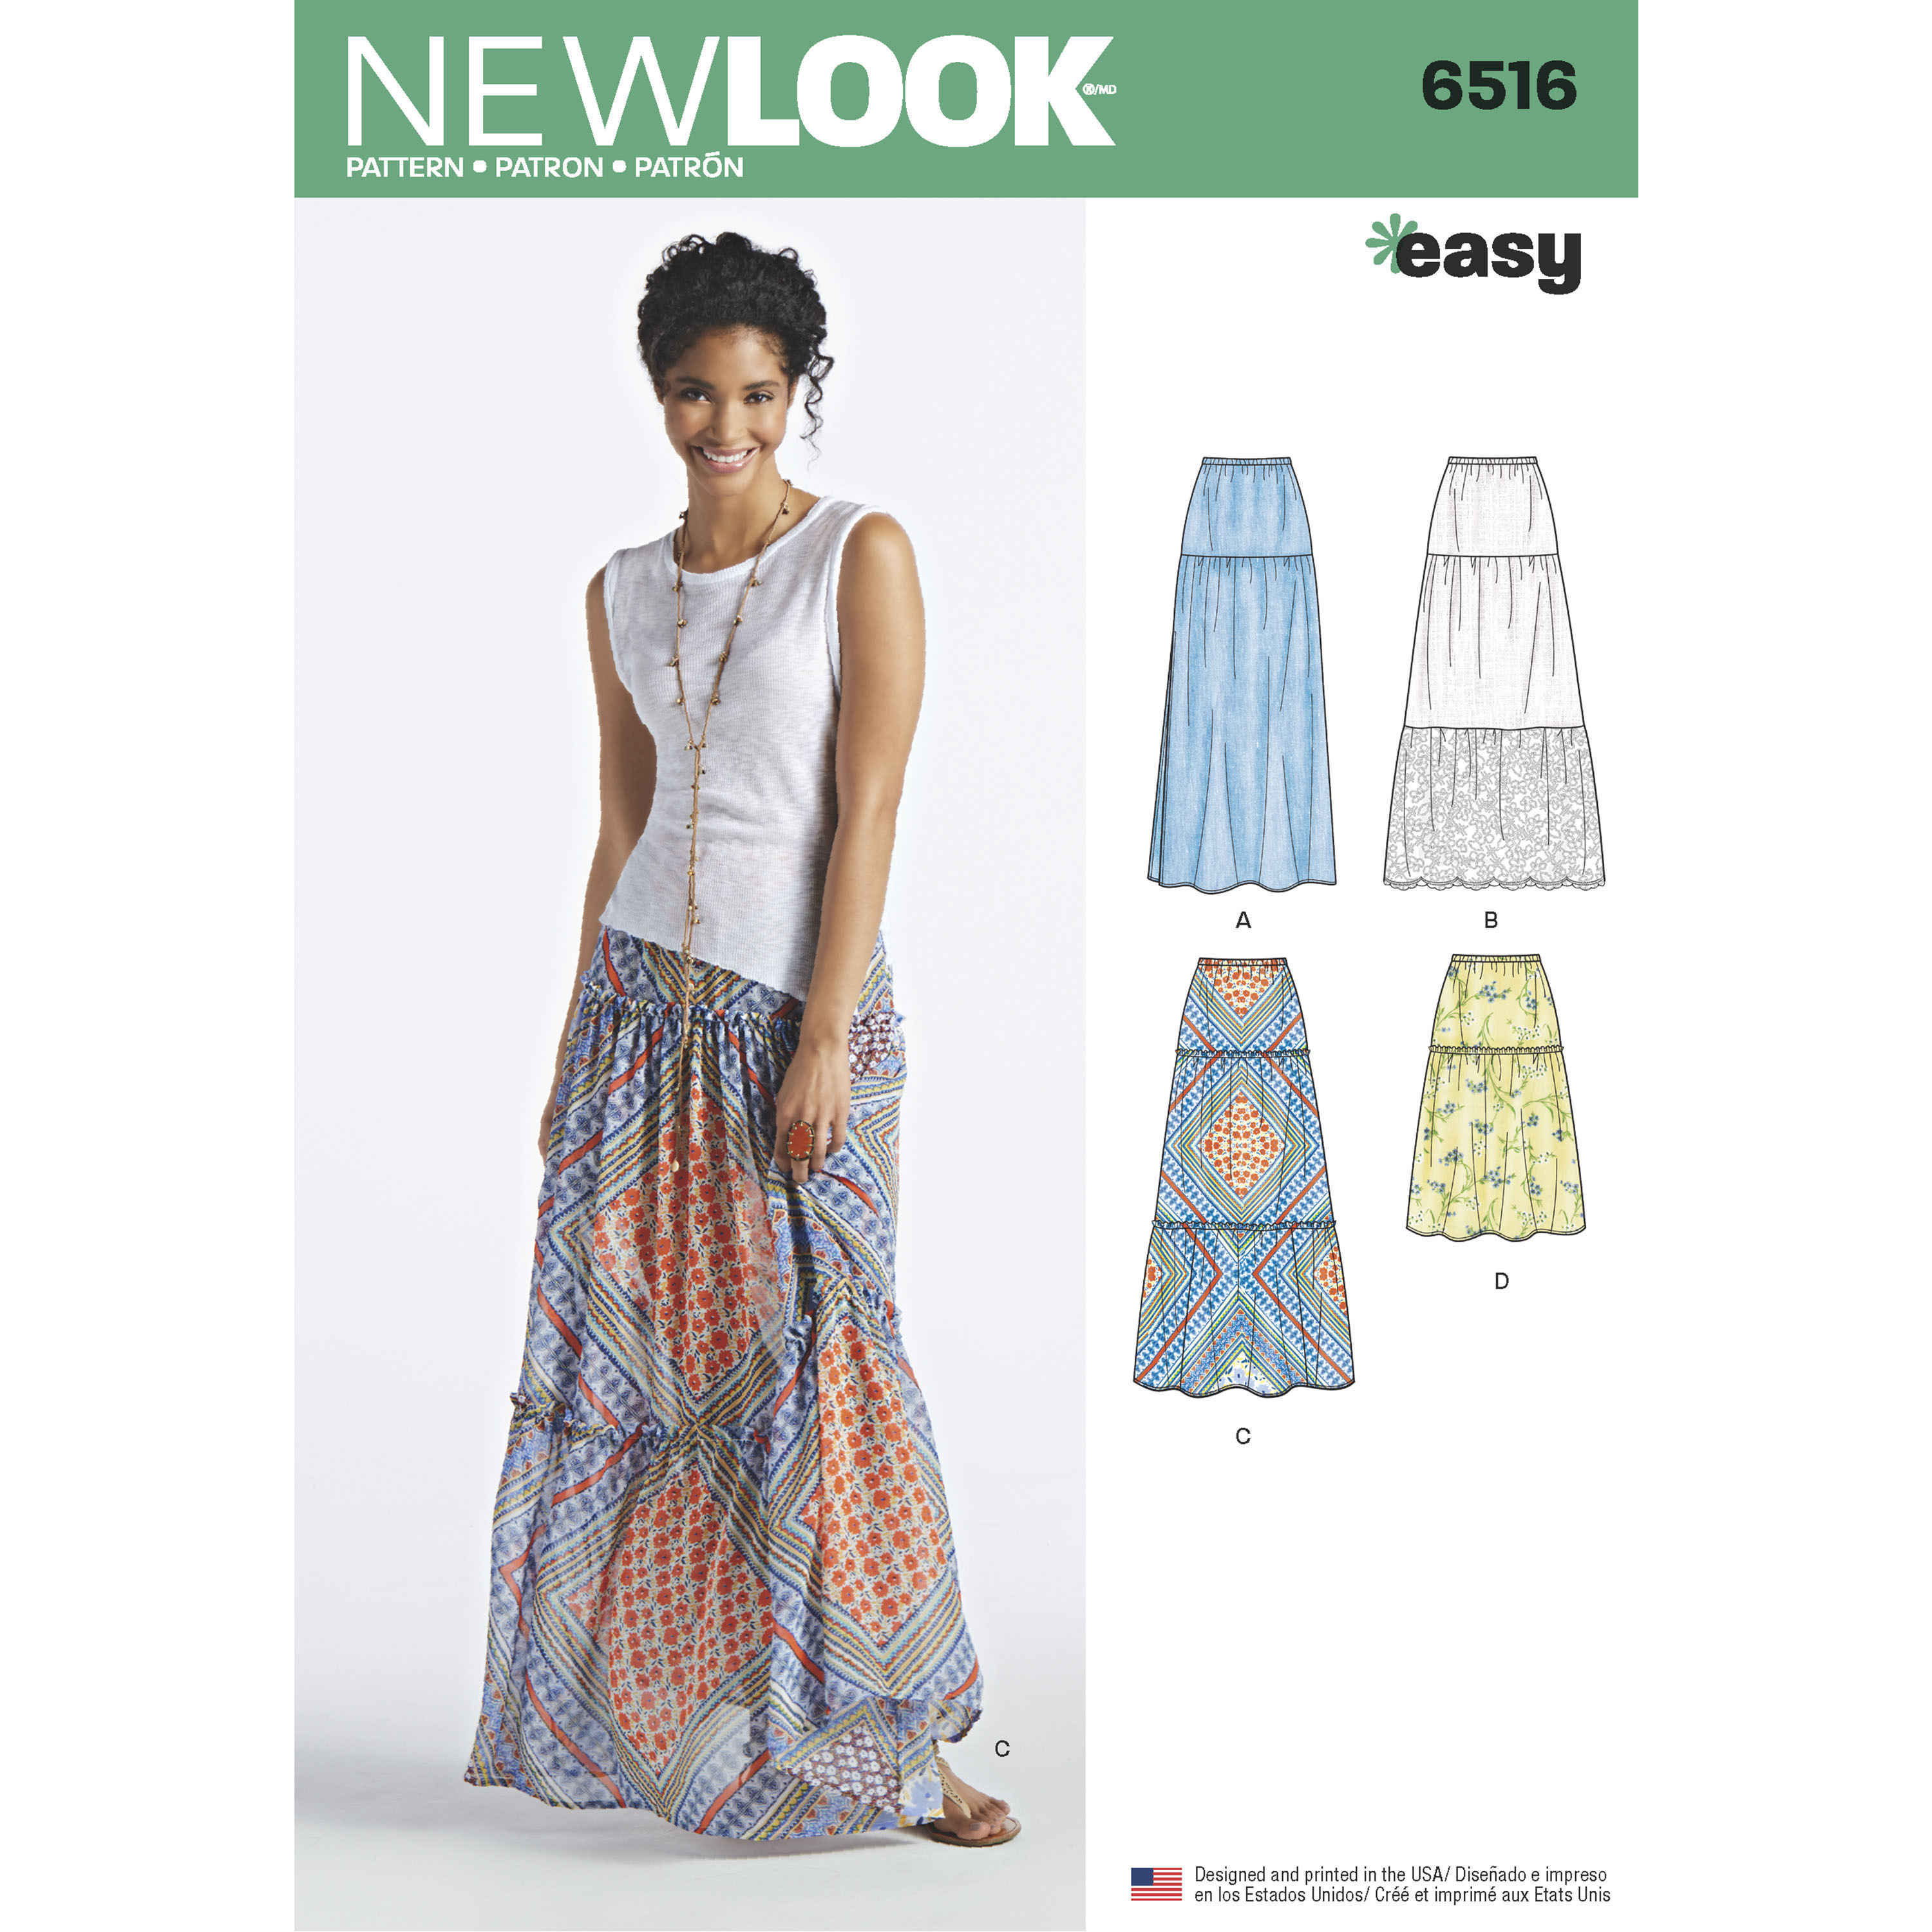 New Look Pattern 6516 Misses' Skirts with Length and Fabric Variations